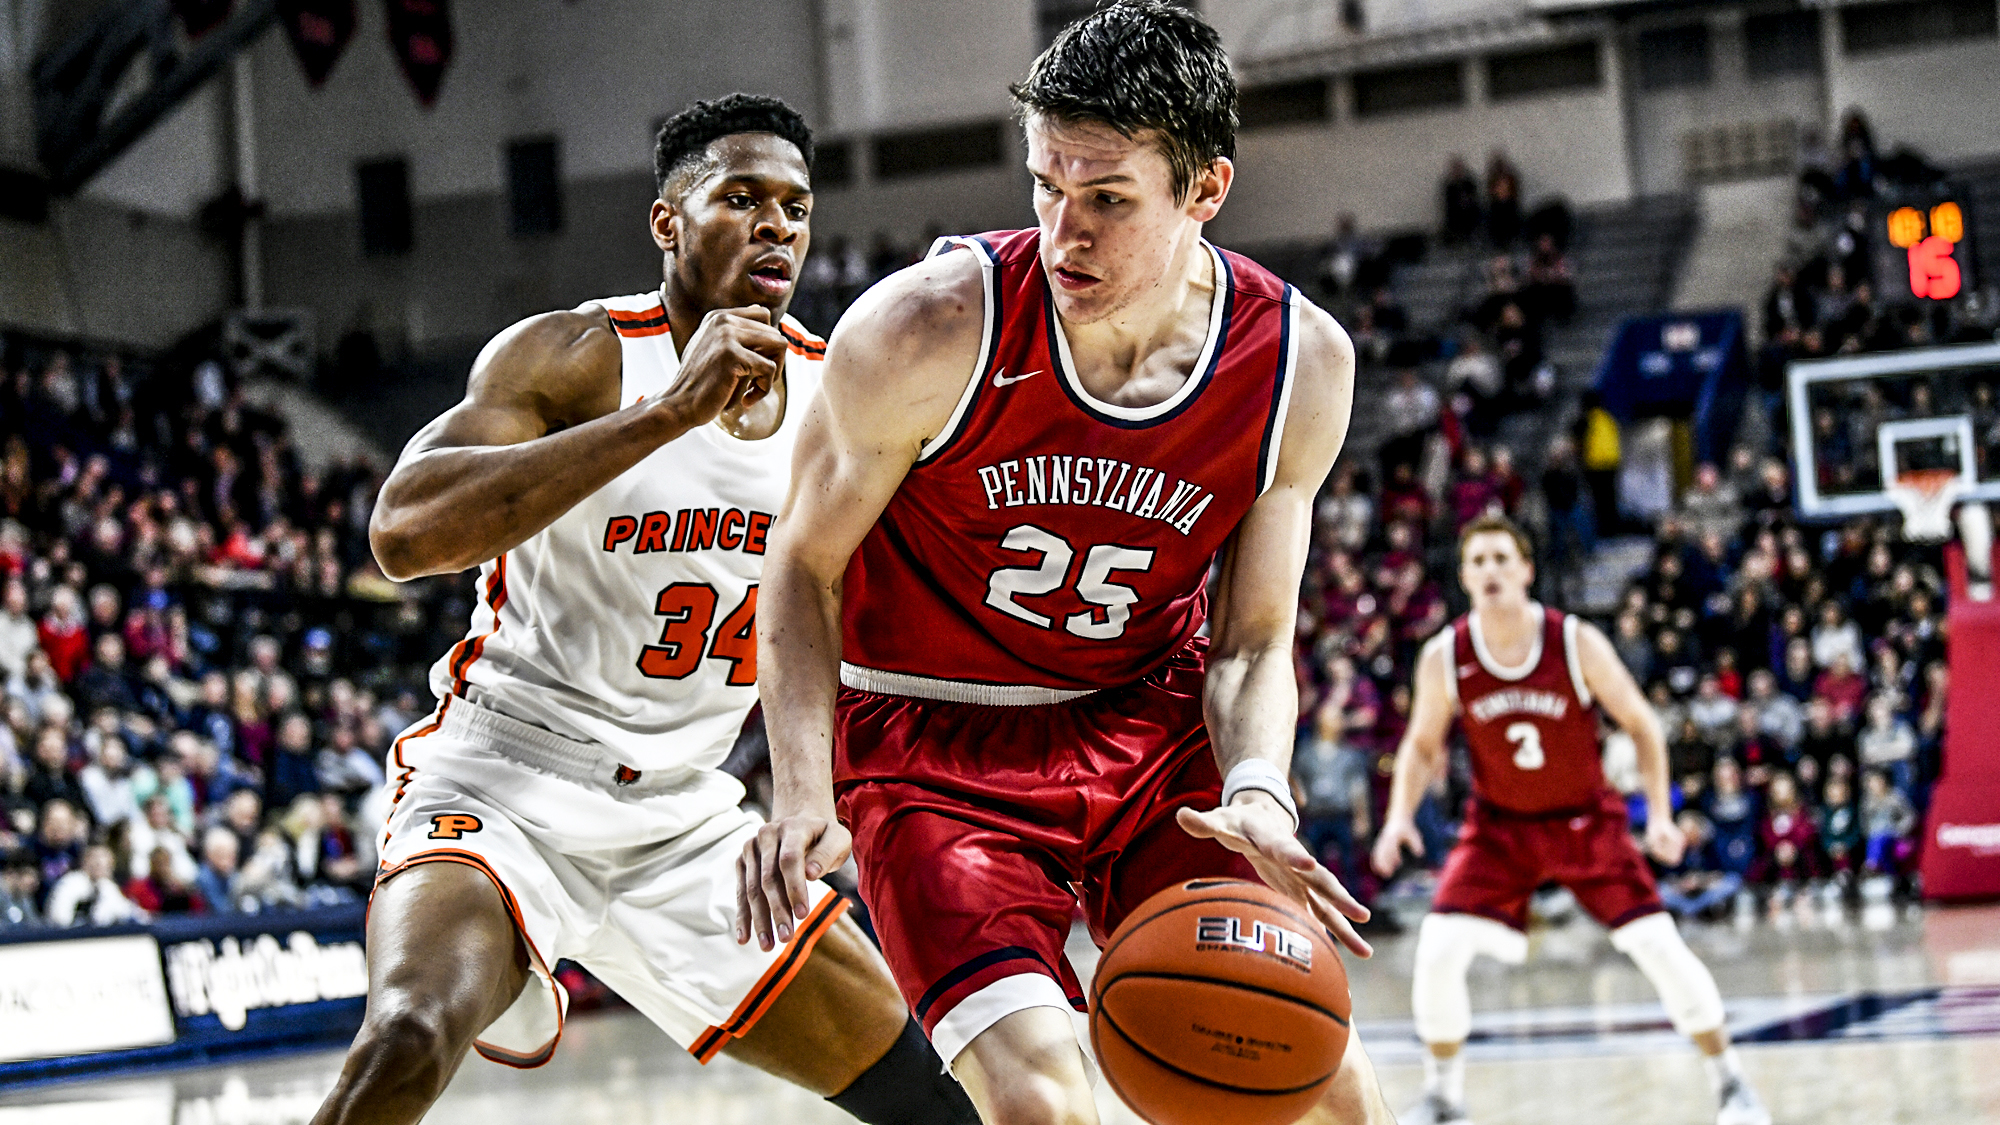 AJ Brodeur dribbles to the basketball against Princeton at the Palestra.